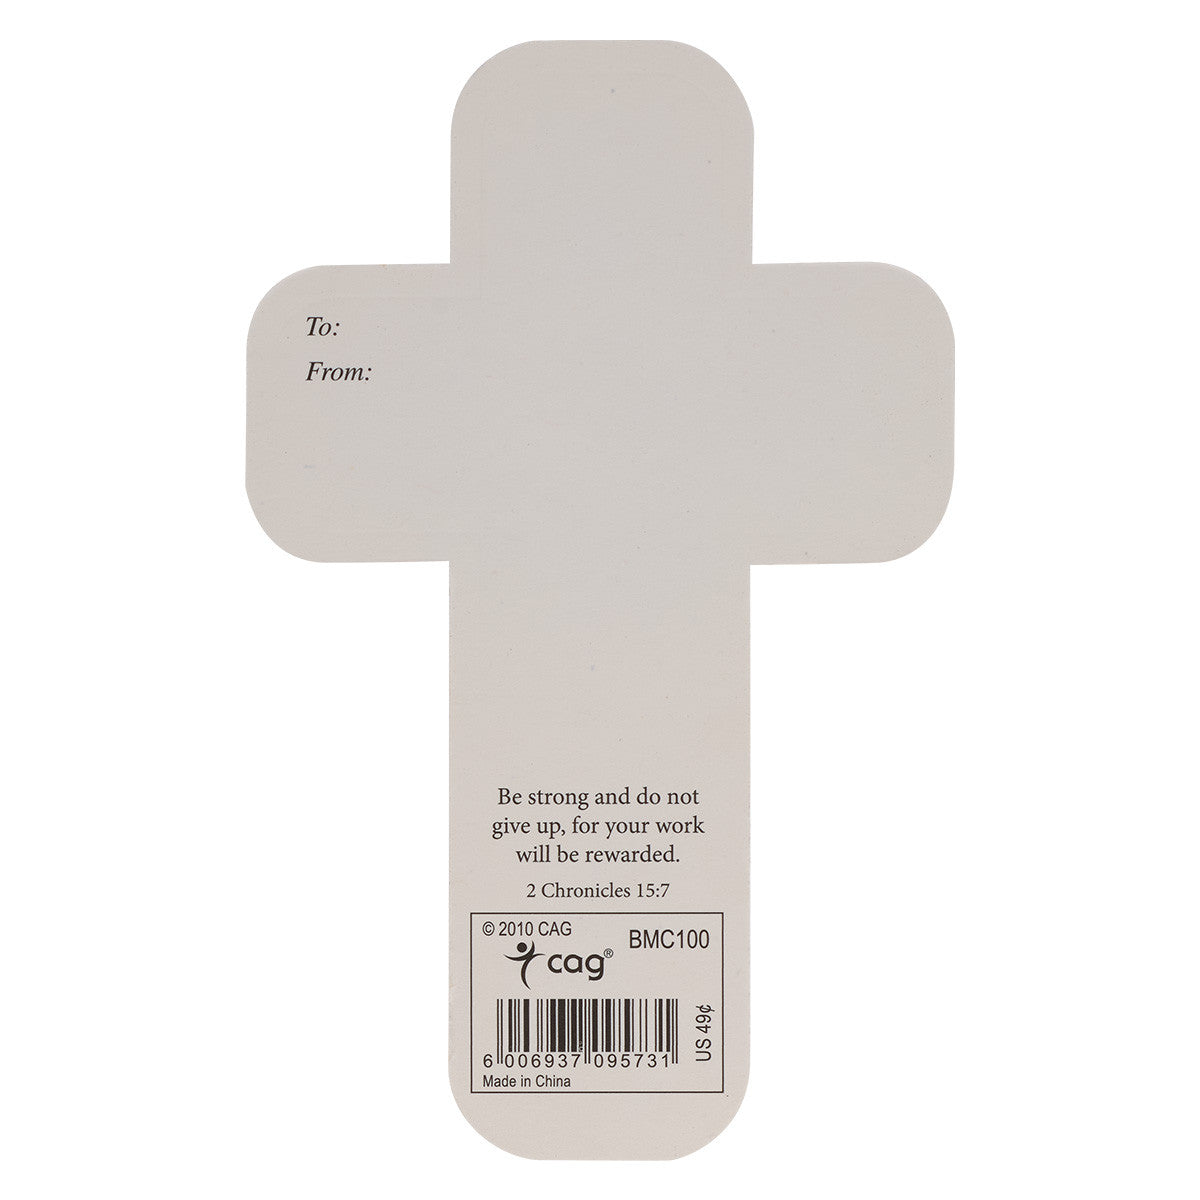 On Wings Like Eagles Paper Cross Bookmark - Isaiah 40:31 - The Christian Gift Company